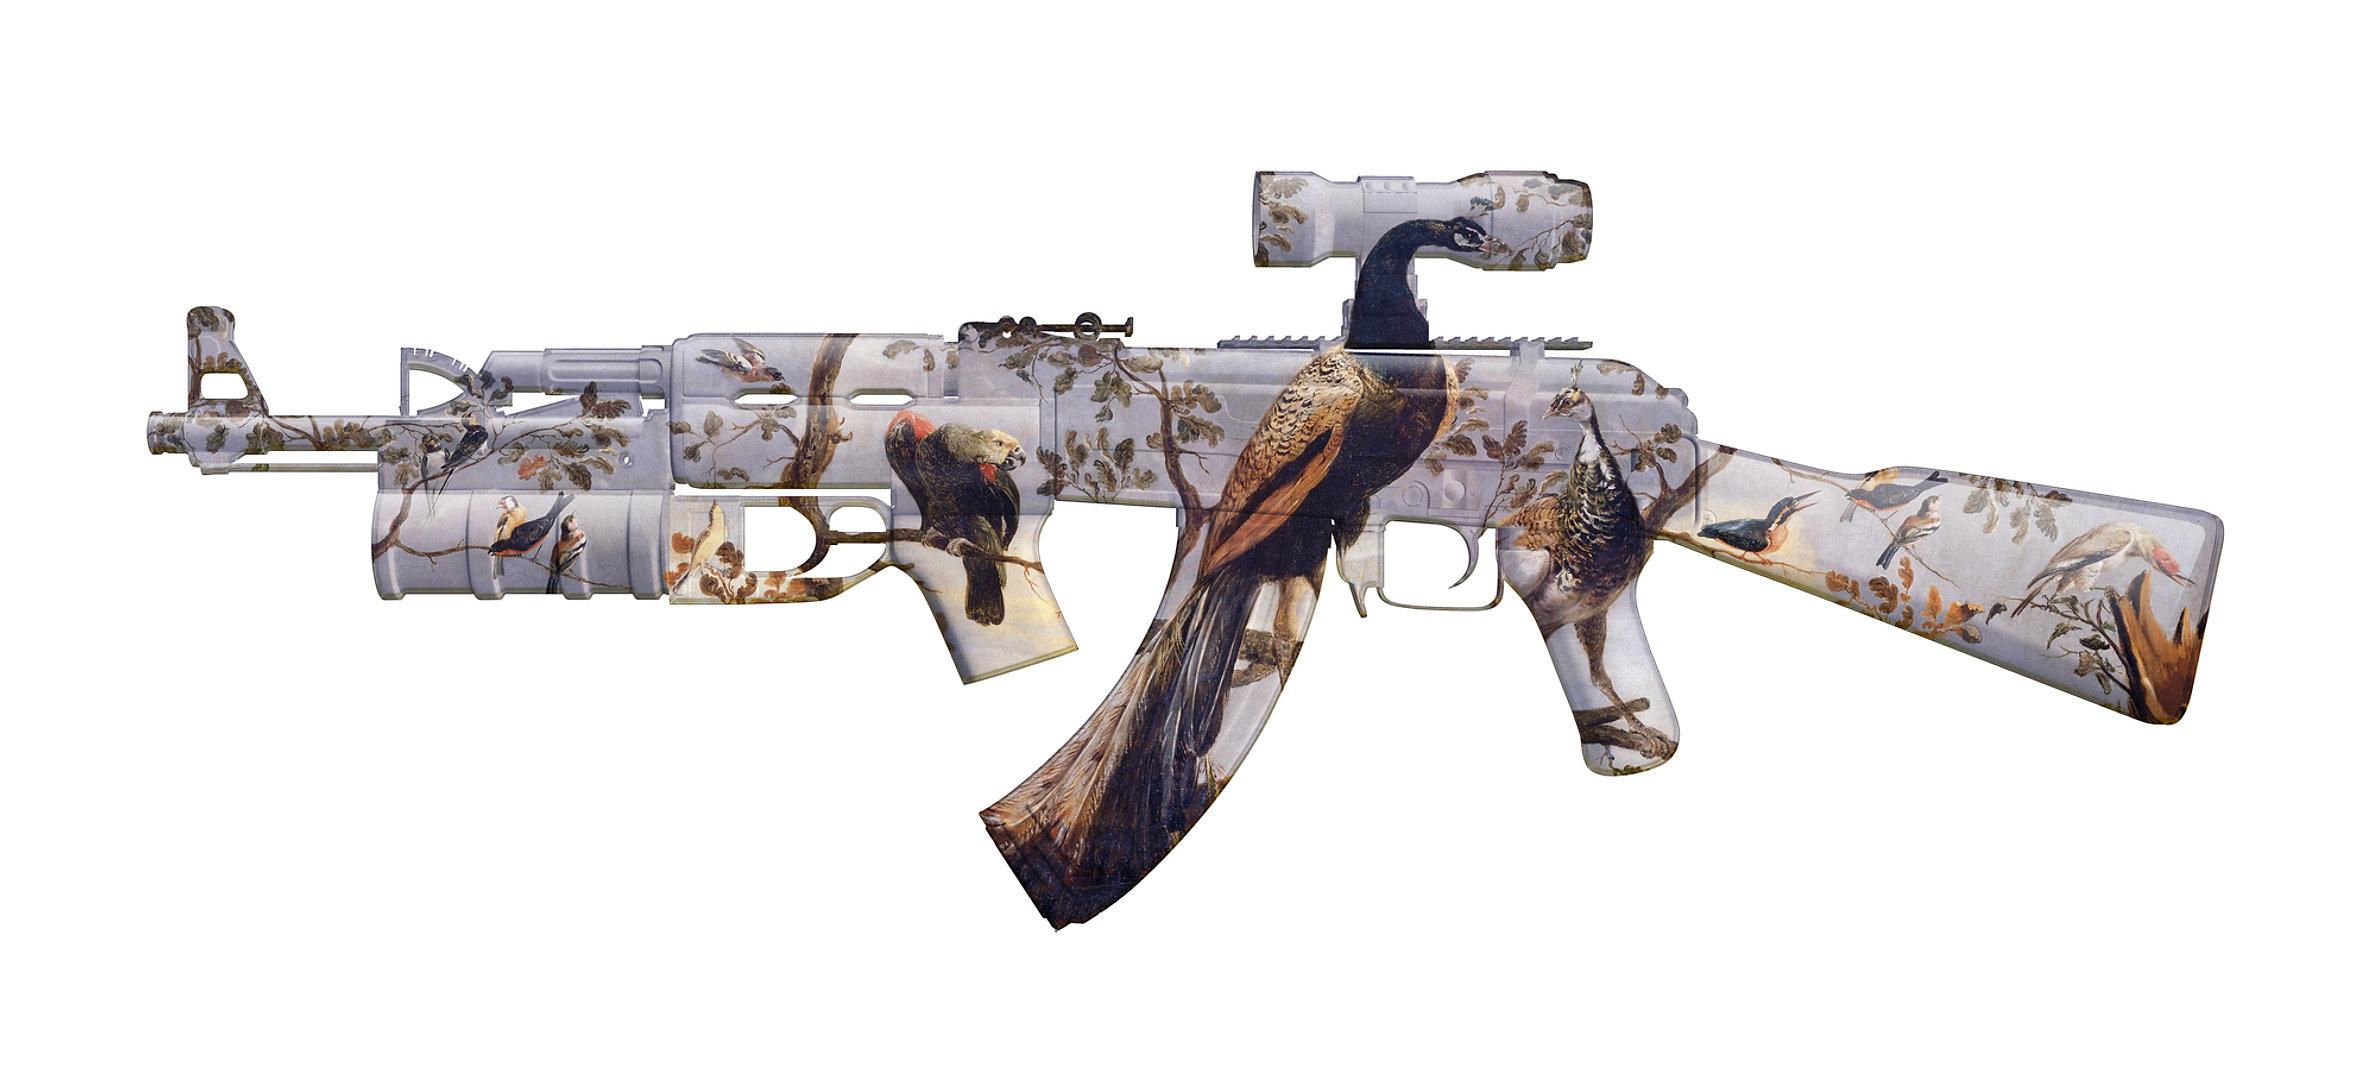 Magnus Gjoen, AK-47 CONCERT OF BIRDS, 2012

Print featuring AK-47 covered in gorgeous nature imagery. Printed using archival pigment inks on 308gsm cotton rag. 

Part of an edition of 50.

100 X 44 cm 